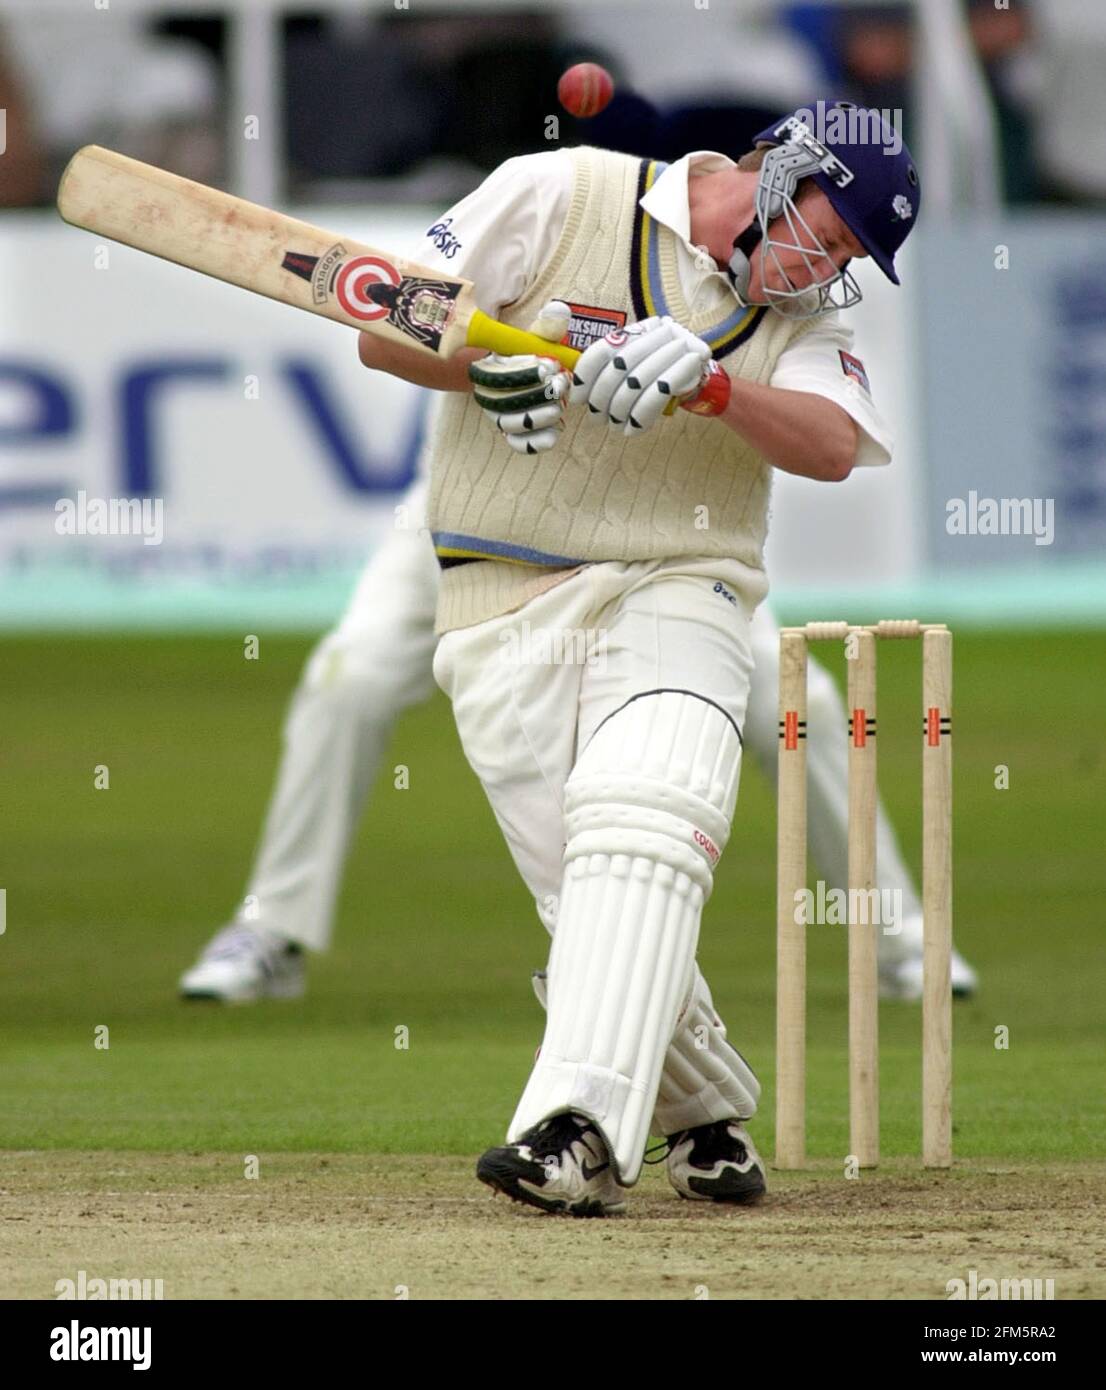 COUNTY CRICKET - KENT V YWORKS AT CANTERBURY, APR 2001 A MCGRATH DUCKS A BALL FROM M SAGGERS Banque D'Images